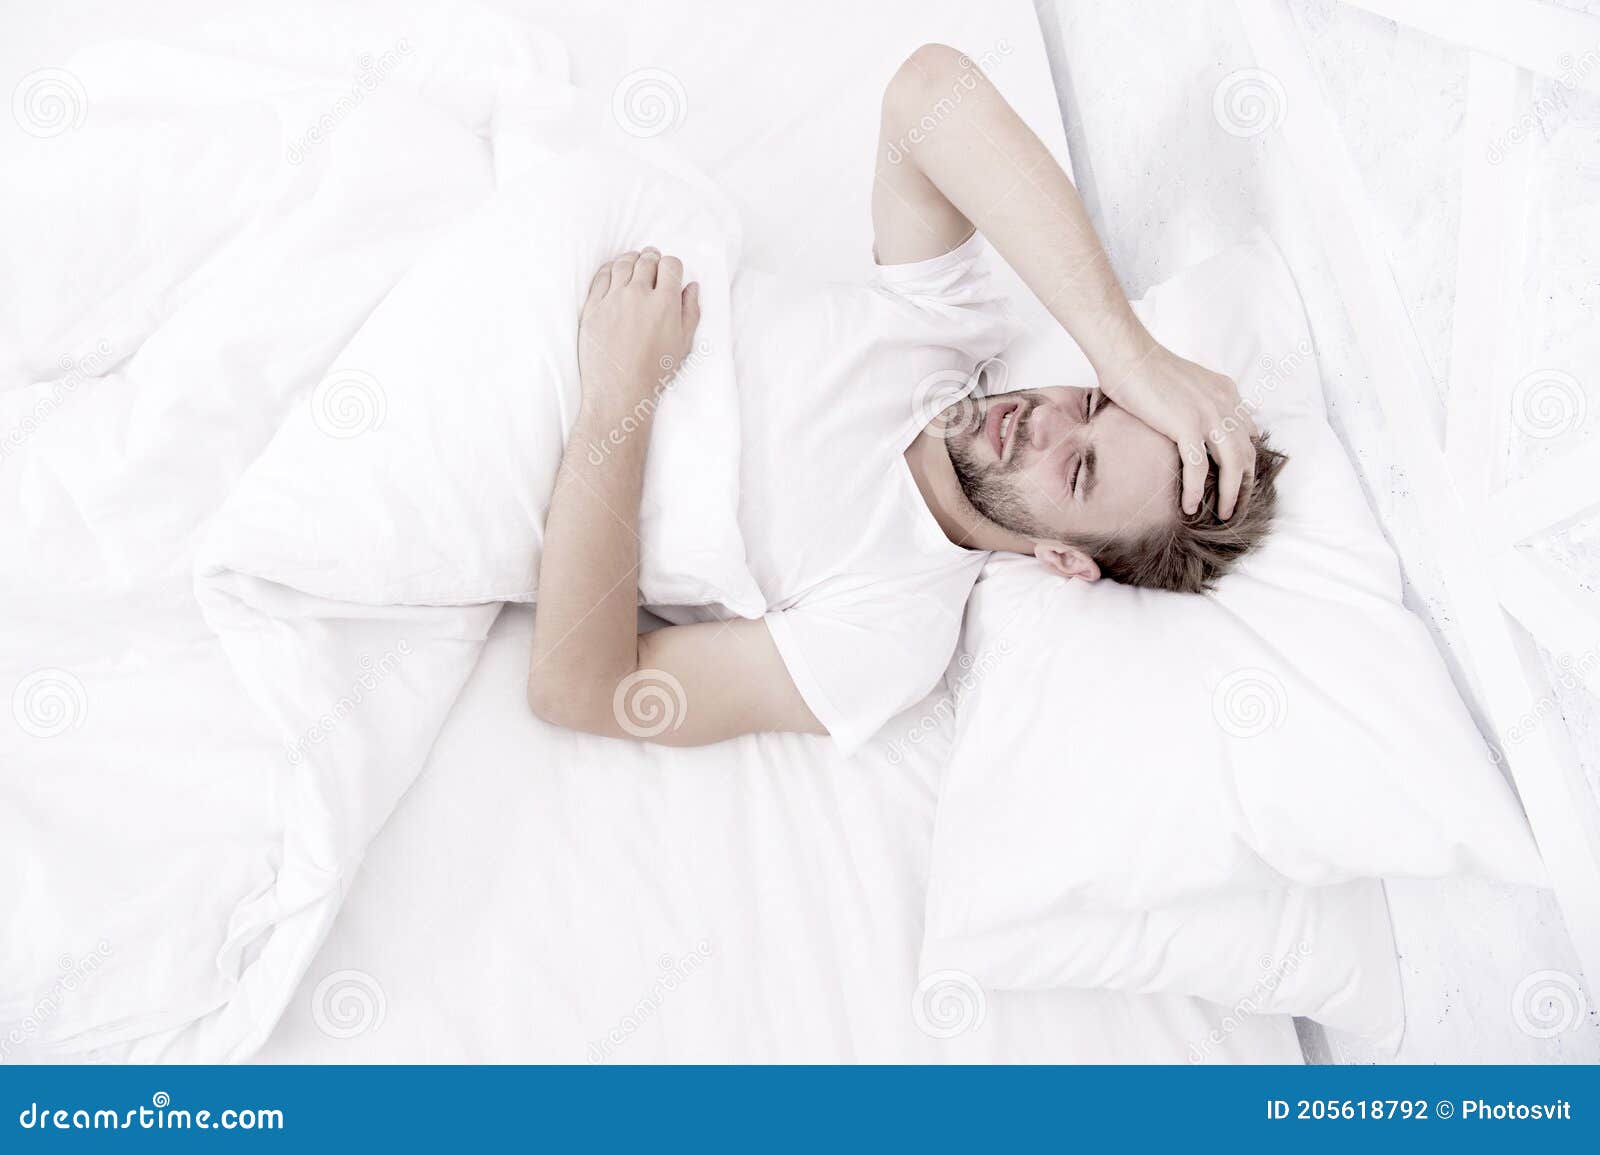 limit activities in bed. guy had sleepless night. male health concept. peacefulness concept. tired man sleep in bed